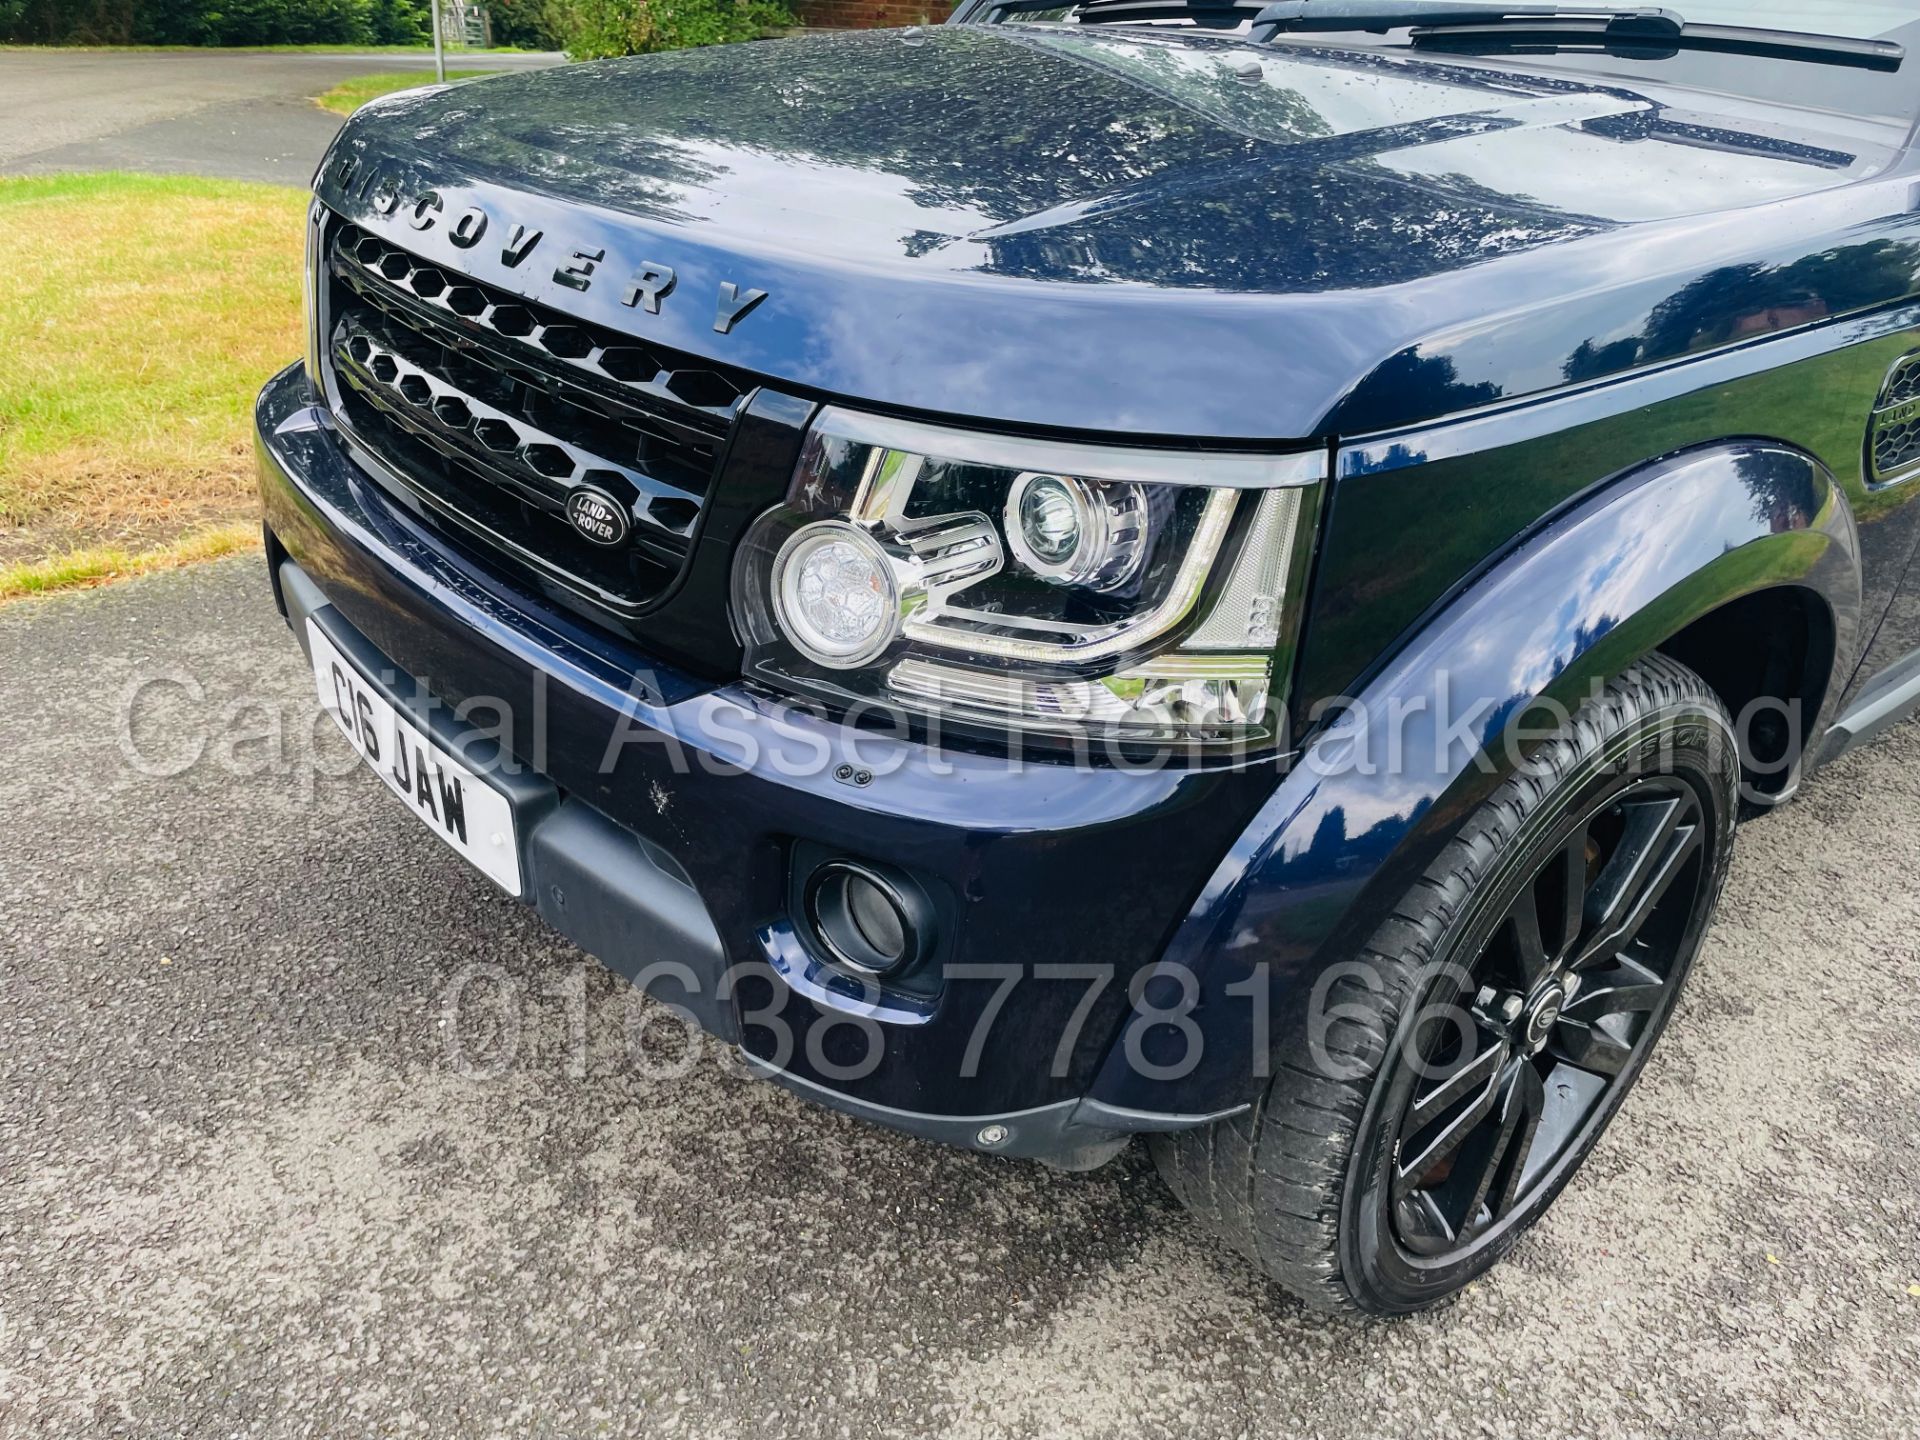 LAND ROVER DISCOVERY 4 *HSE* 7 SEATER SUV (2014 - NEW MODEL) '3.0 SDV6 - 255 BHP - 8 SPEED AUTO' - Image 16 of 61